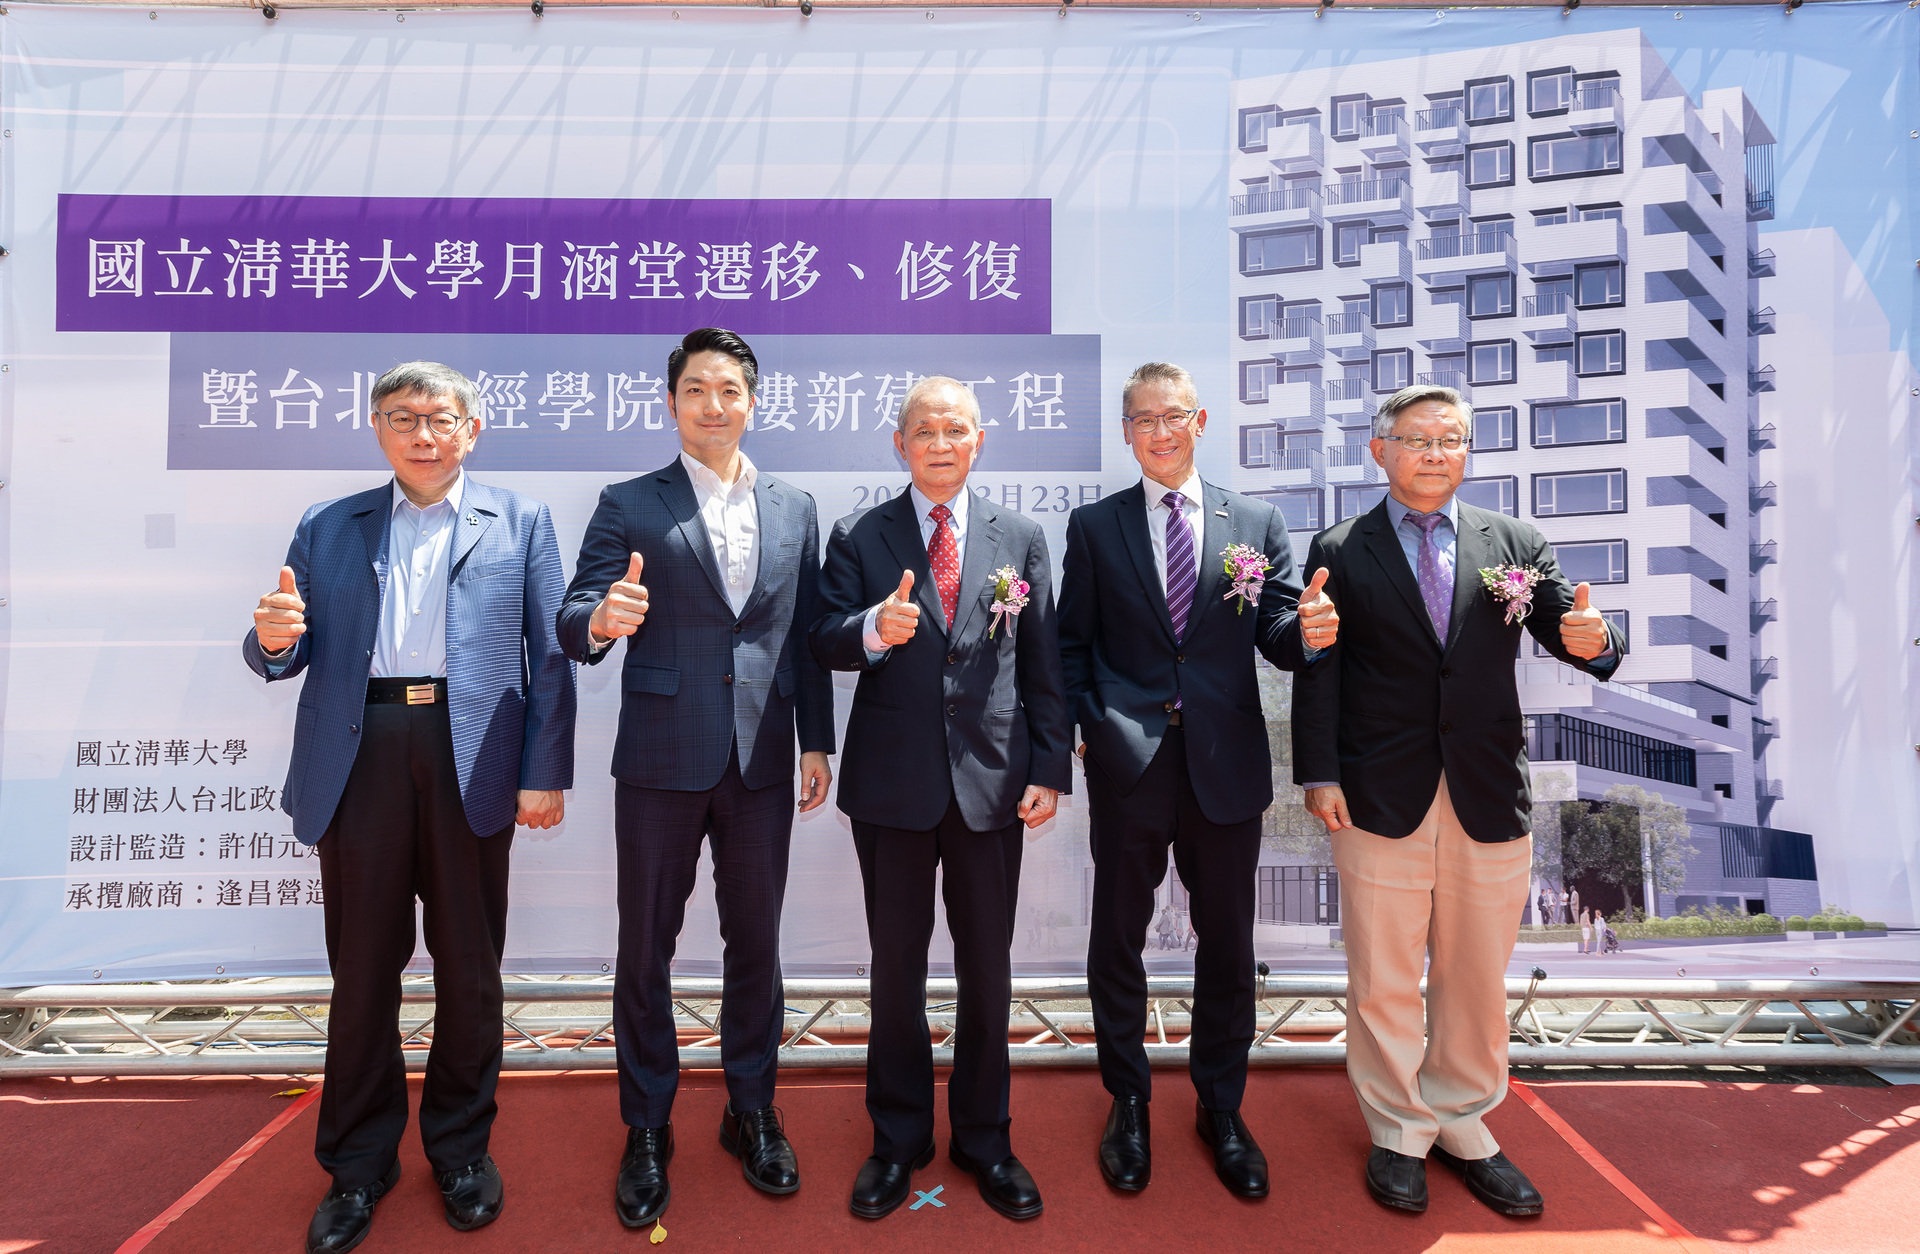 NTHU held a groundbreaking ceremony for the construction of the Taipei School of Economics and Political Science today. From right: Former NTHU president Hong Hocheng (賀陳弘), NTHU president W. John Kao (高為元), the chairman of TSE, Huang-Hsiung Huang (黃煌雄), Taipei City mayor Wan-An Chiang (蔣萬安), and the former mayor of Taipei, Wen-Je Ko (柯文哲).